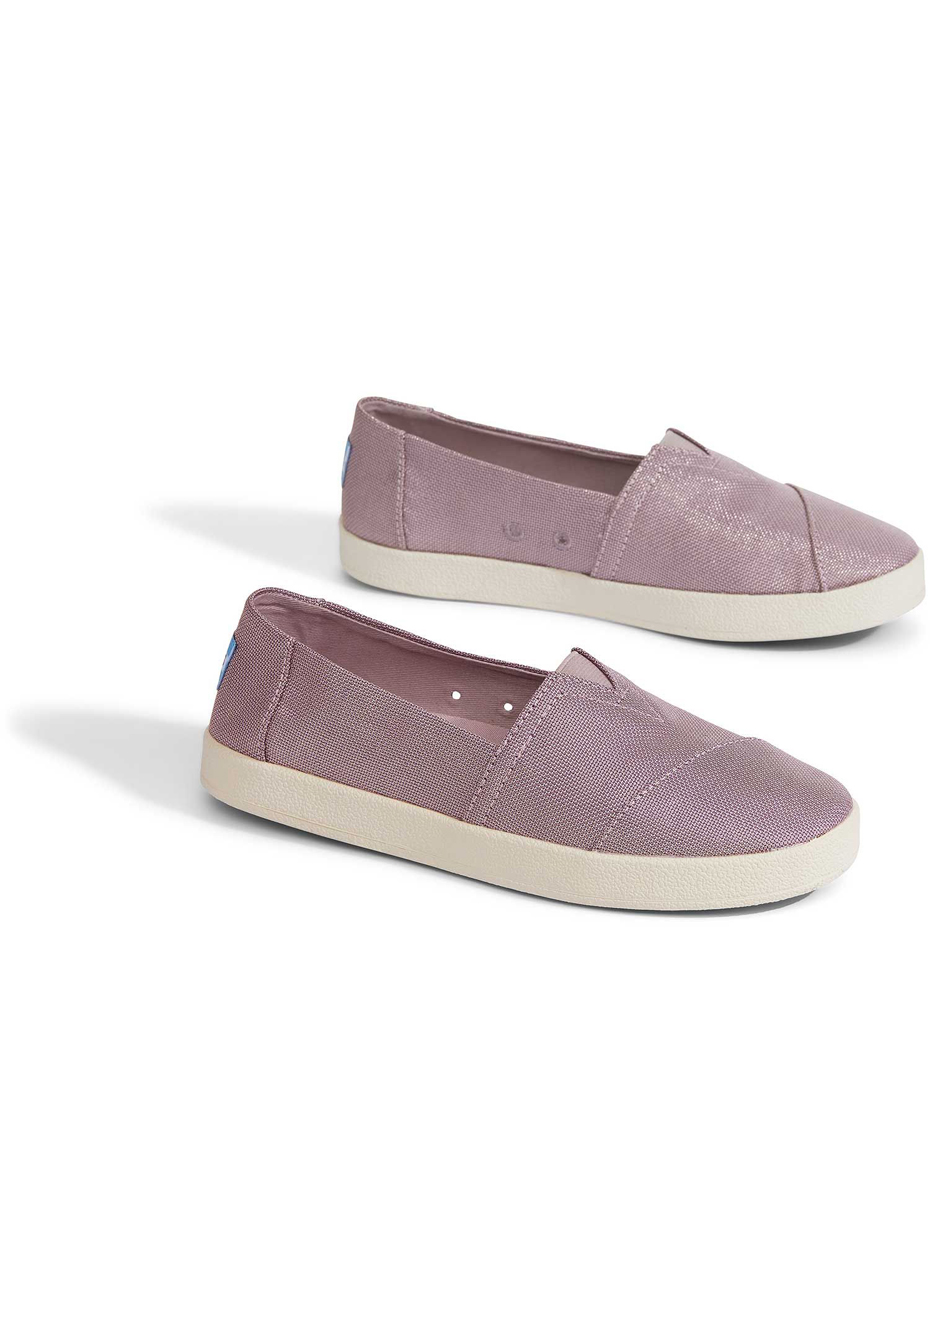 Toms Shoes - Womens Avalon Burnished 